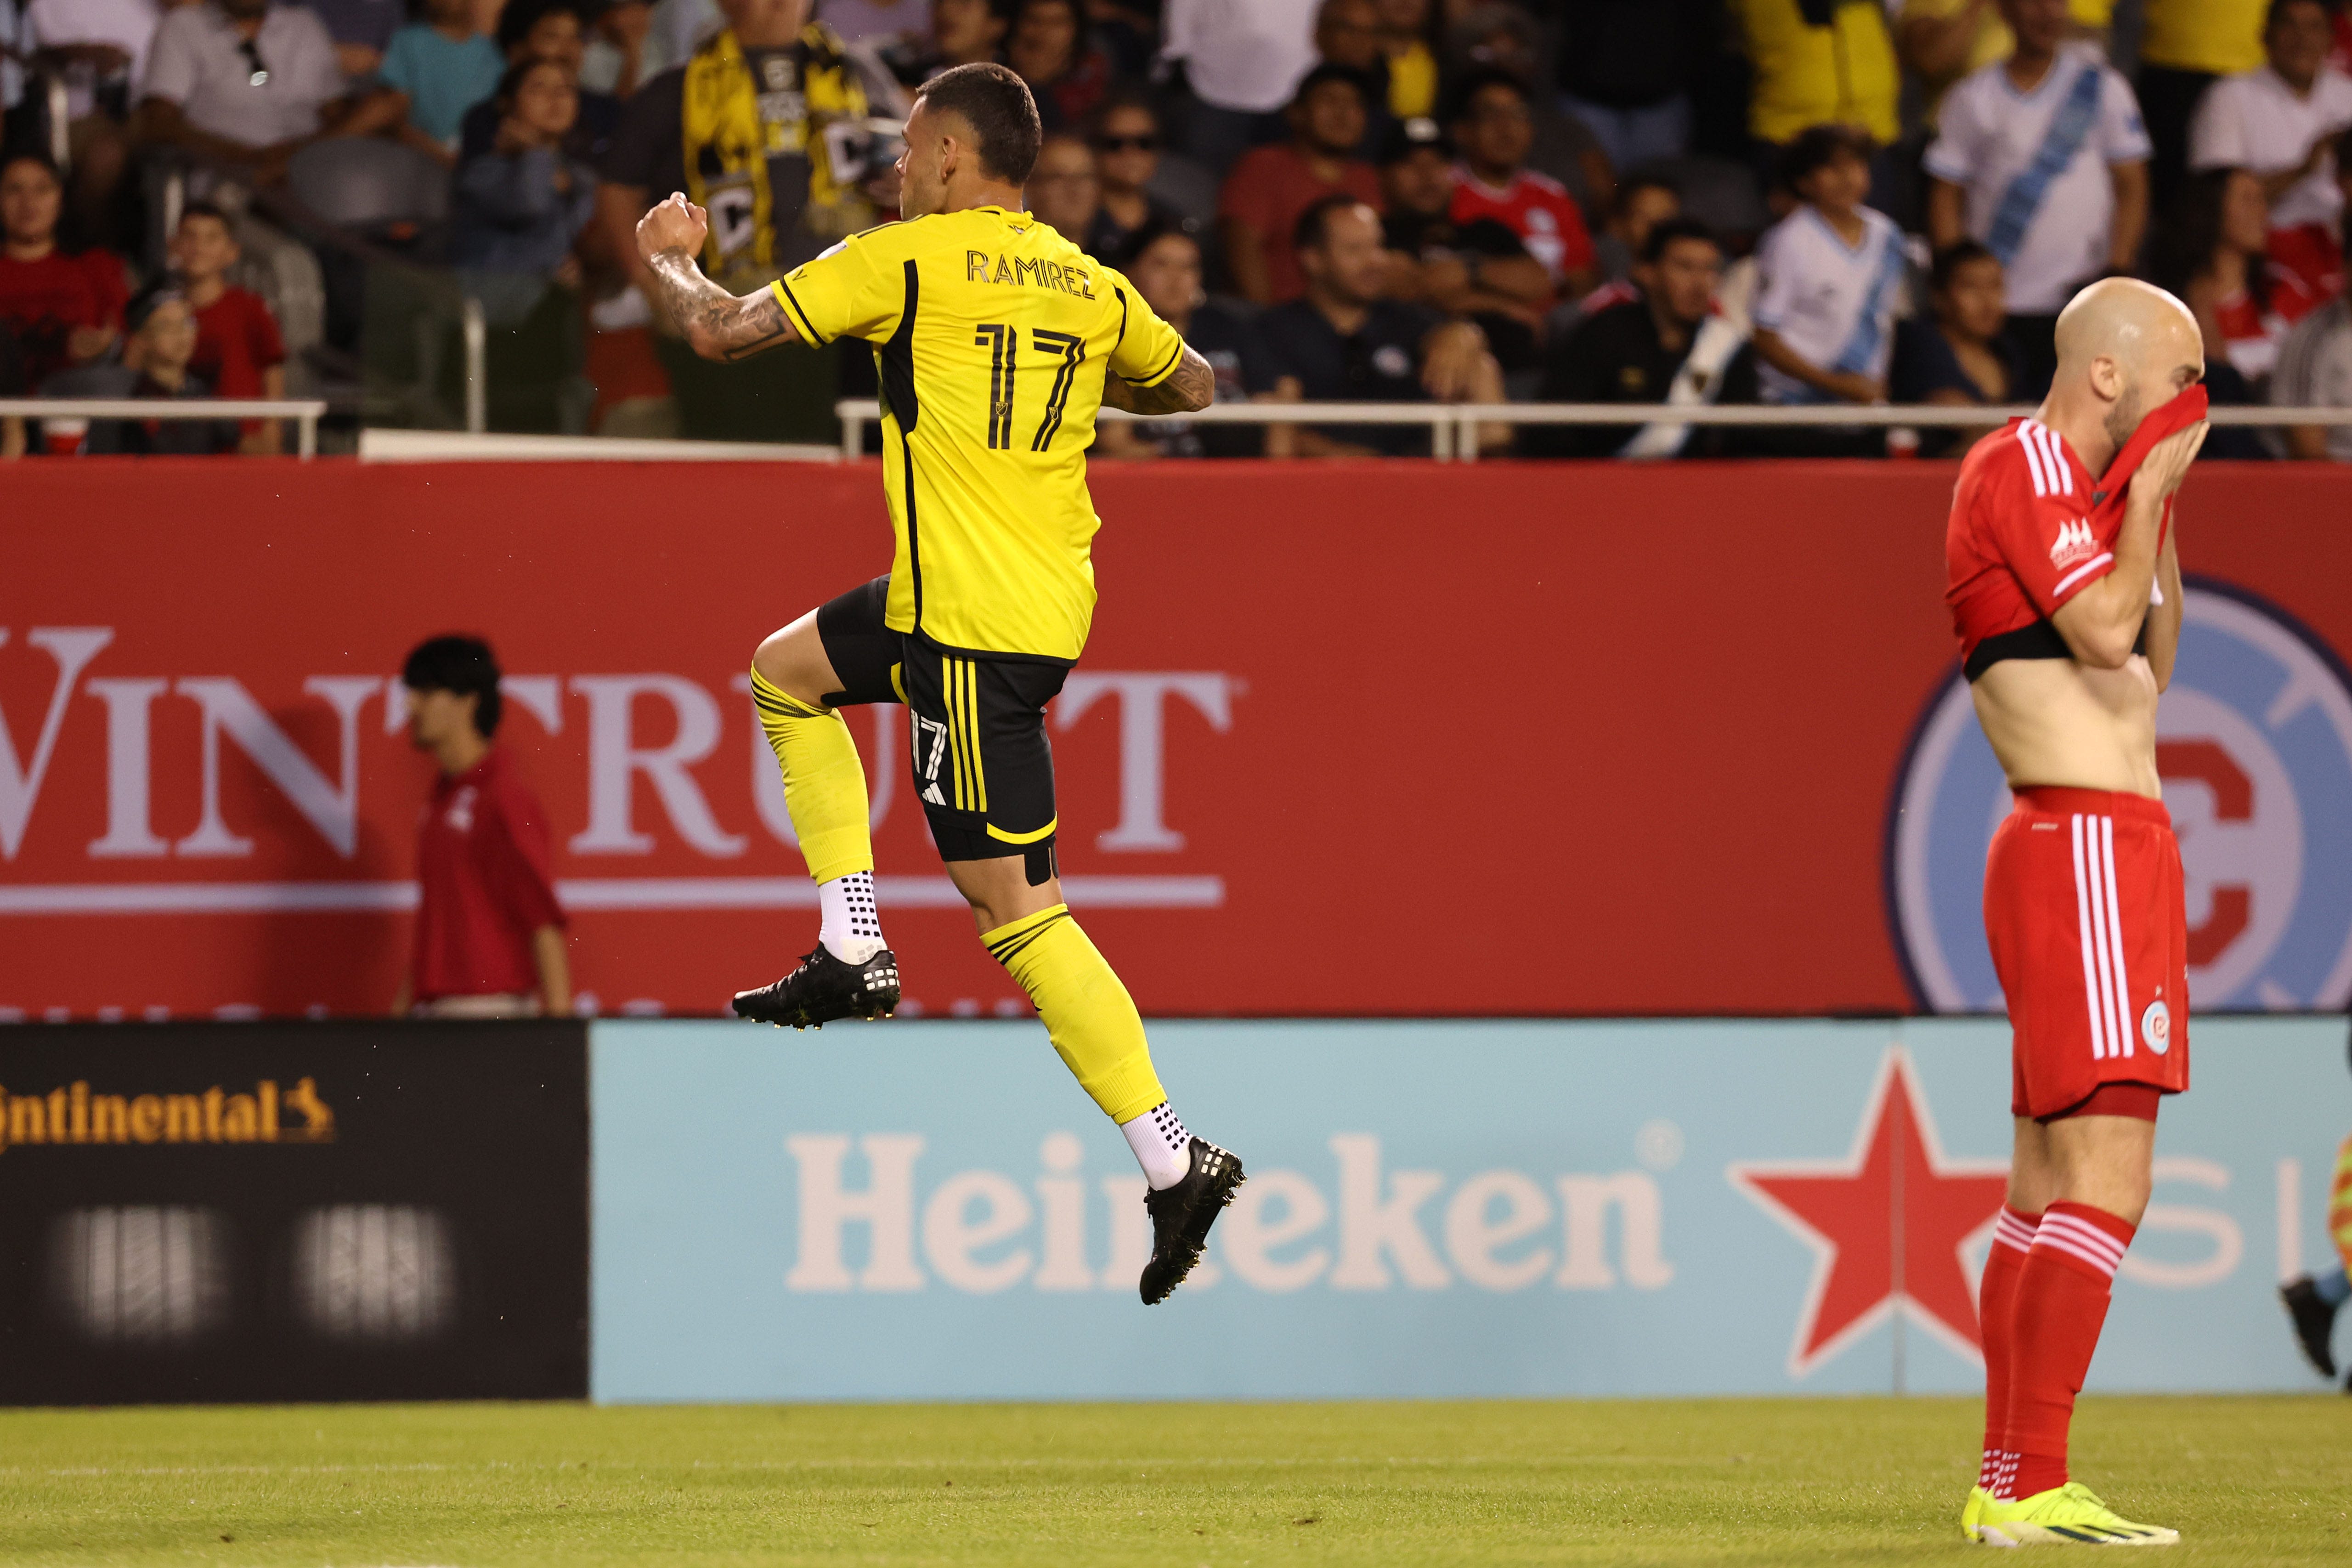 Columbus Crew wins second road match in a row, defeating Chicago Fire 3-1: Replay